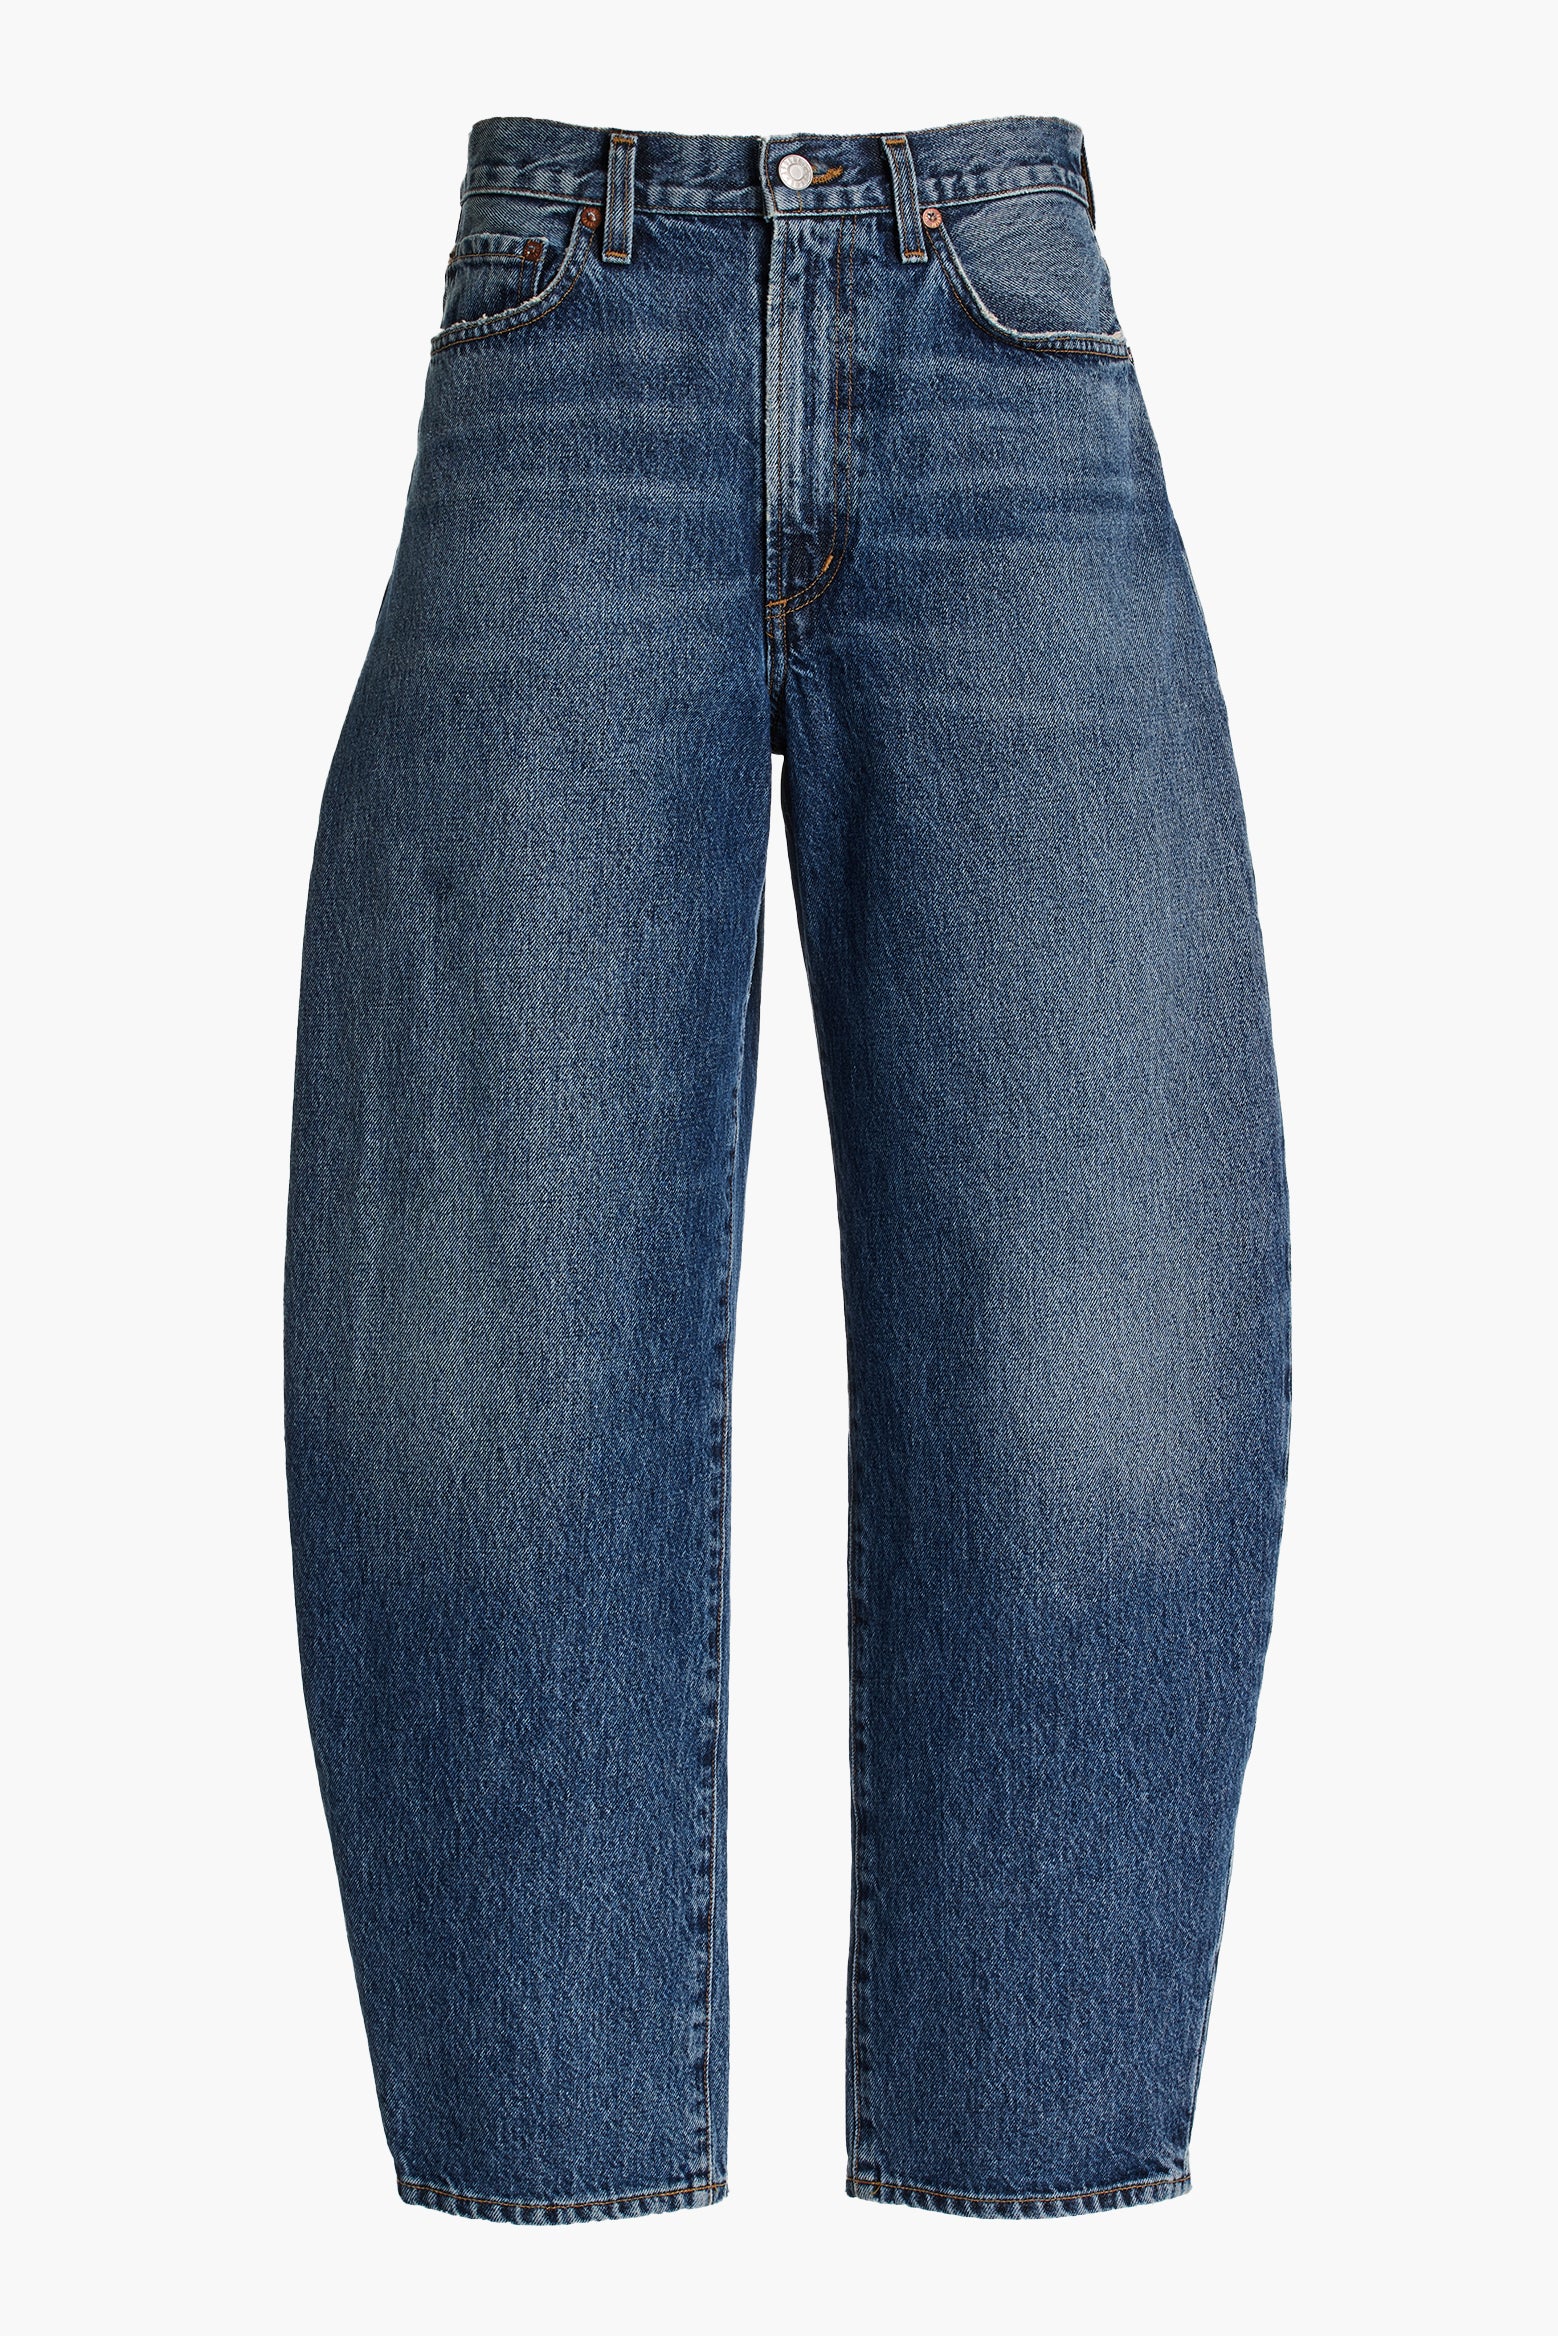 Agolde Balloon Ultra High Rise Curved Jean in Control available at The New Trend Australia